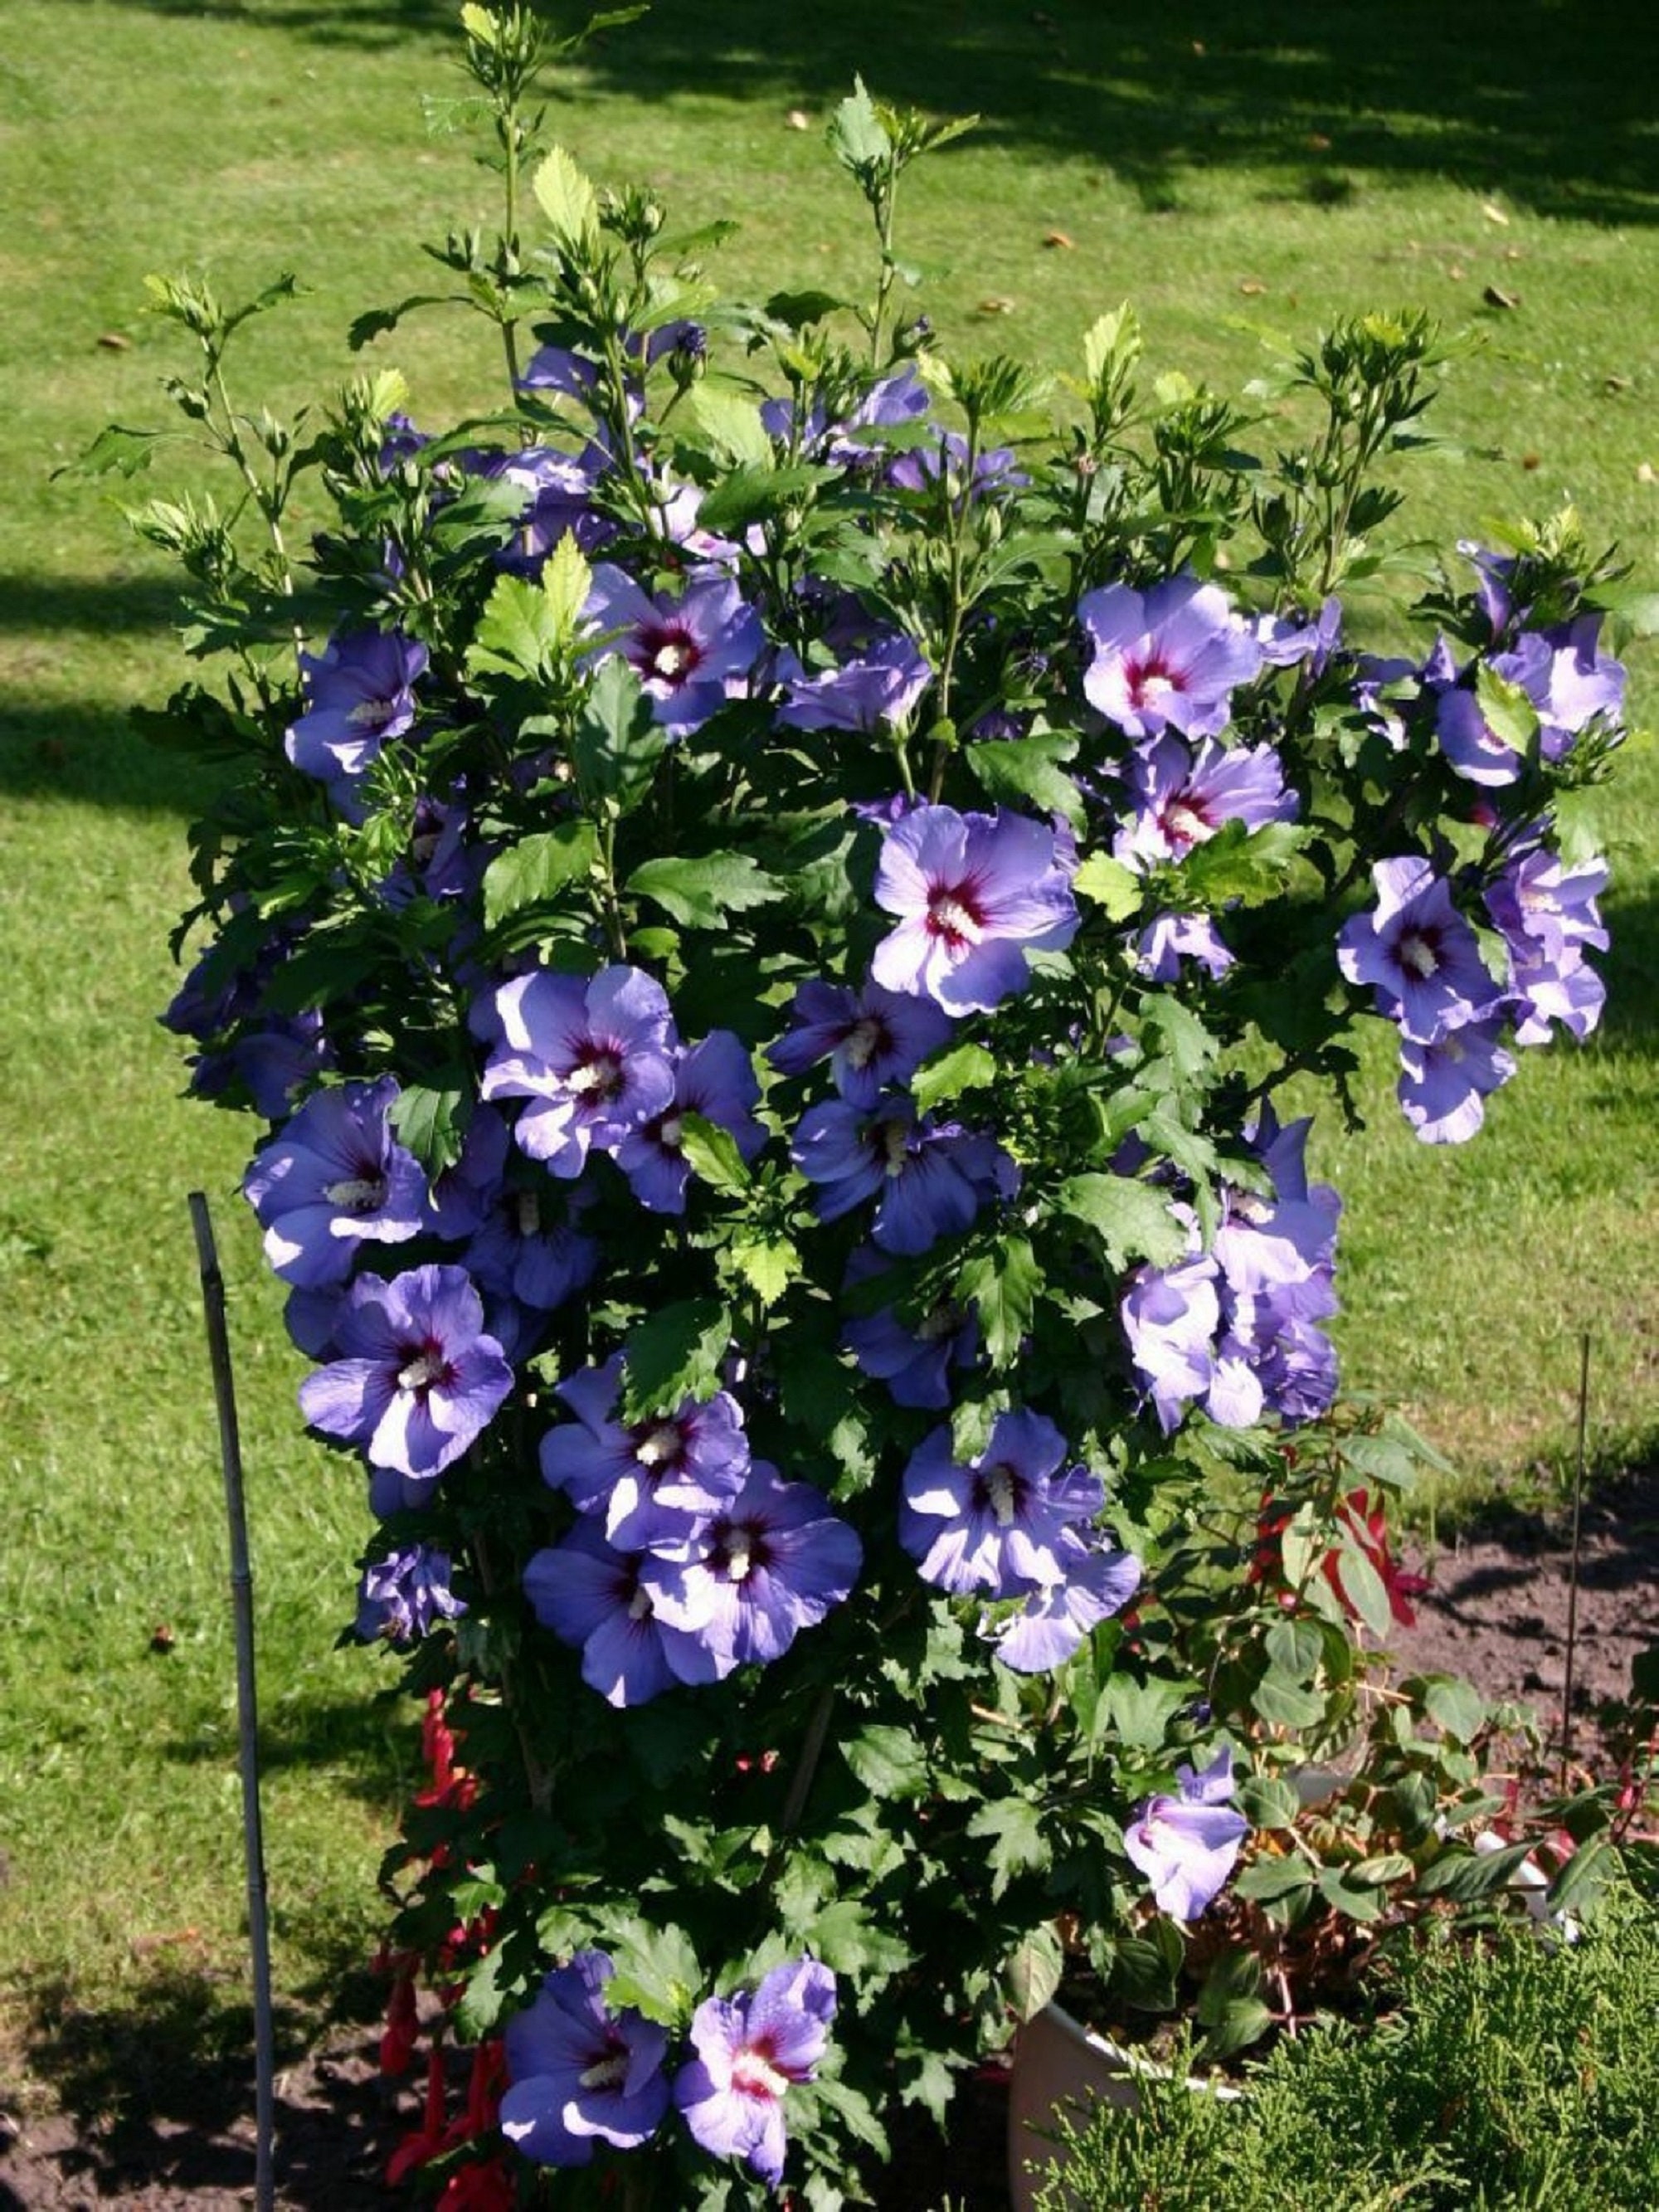 HIBISCUS SYRIACUS 'BLUEBIRD' - Starter Plant - Approx 4-6 Inch - Dormant